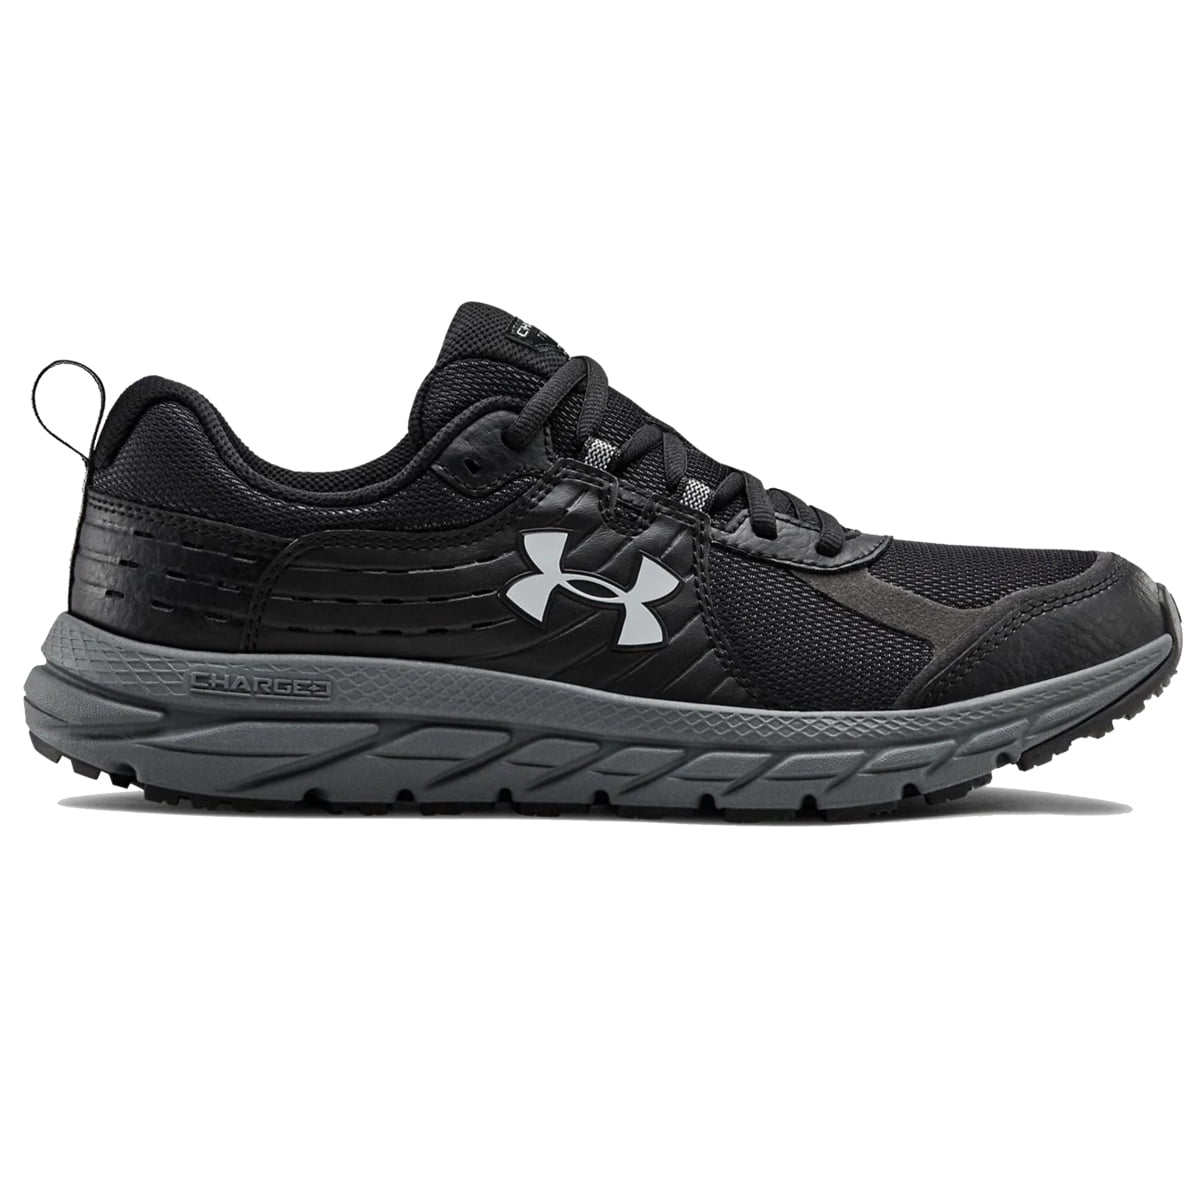 All Sizes Under Armour 1287351 Men's Black UA Mirage 3.0 Hiking Military Shoes 